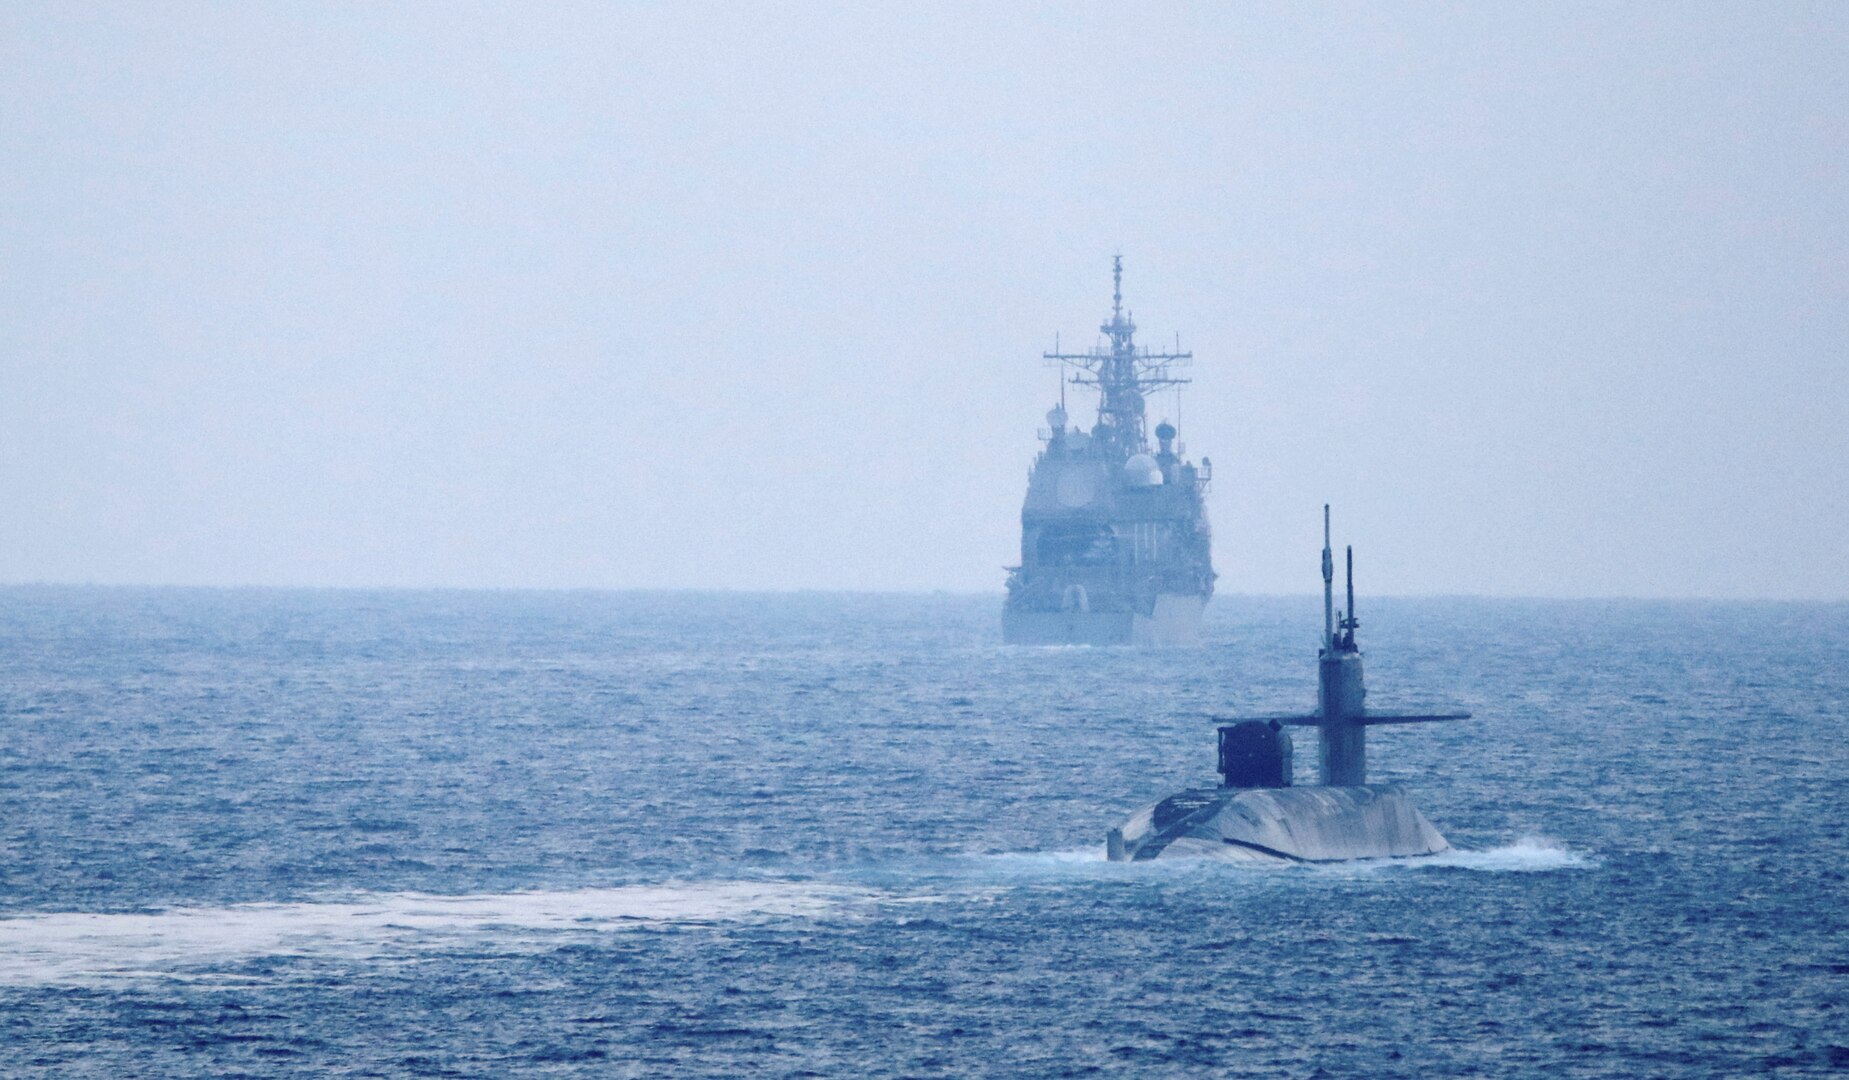 The guided-missile submarine USS Georgia (SSGN 729), front, transits the Strait of Hormuz with the guided-missile cruiser USS Port Royal (CG 73) and the guided-missile cruiser USS Philippine Sea (CG 58), not pictured, Dec. 21. Georgia is deployed to the U.S. 5th Fleet area of operations in support of naval operations to ensure maritime stability and security in the Central Region, connecting the Mediterranean and Pacific through the Western Indian Ocean and three critical chokepoints to the free flow of global commerce.